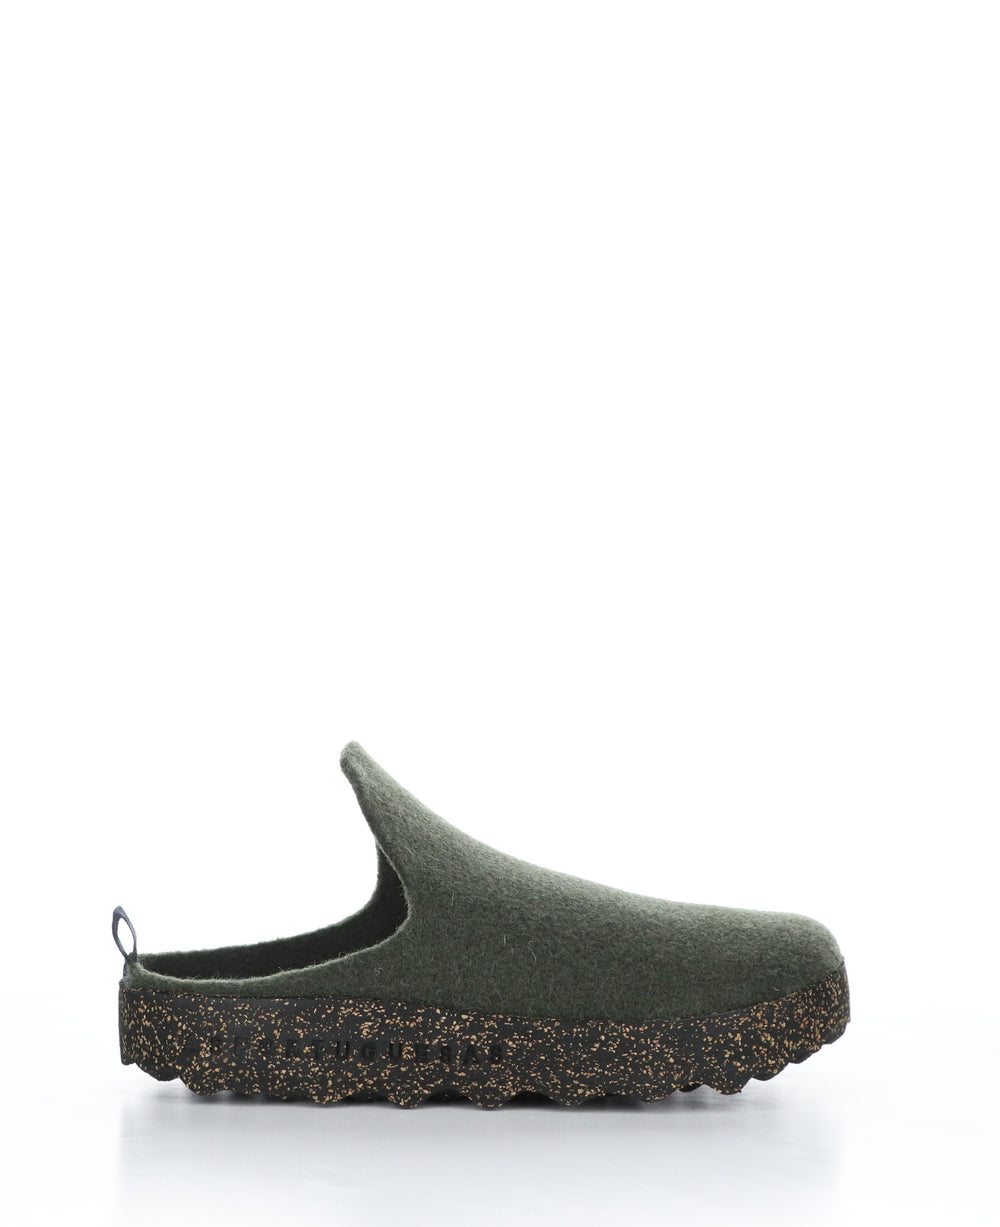 COME061ASPM Military Green Round Toe Shoes|COME061ASPM Chaussures à Bout Rond in Vert